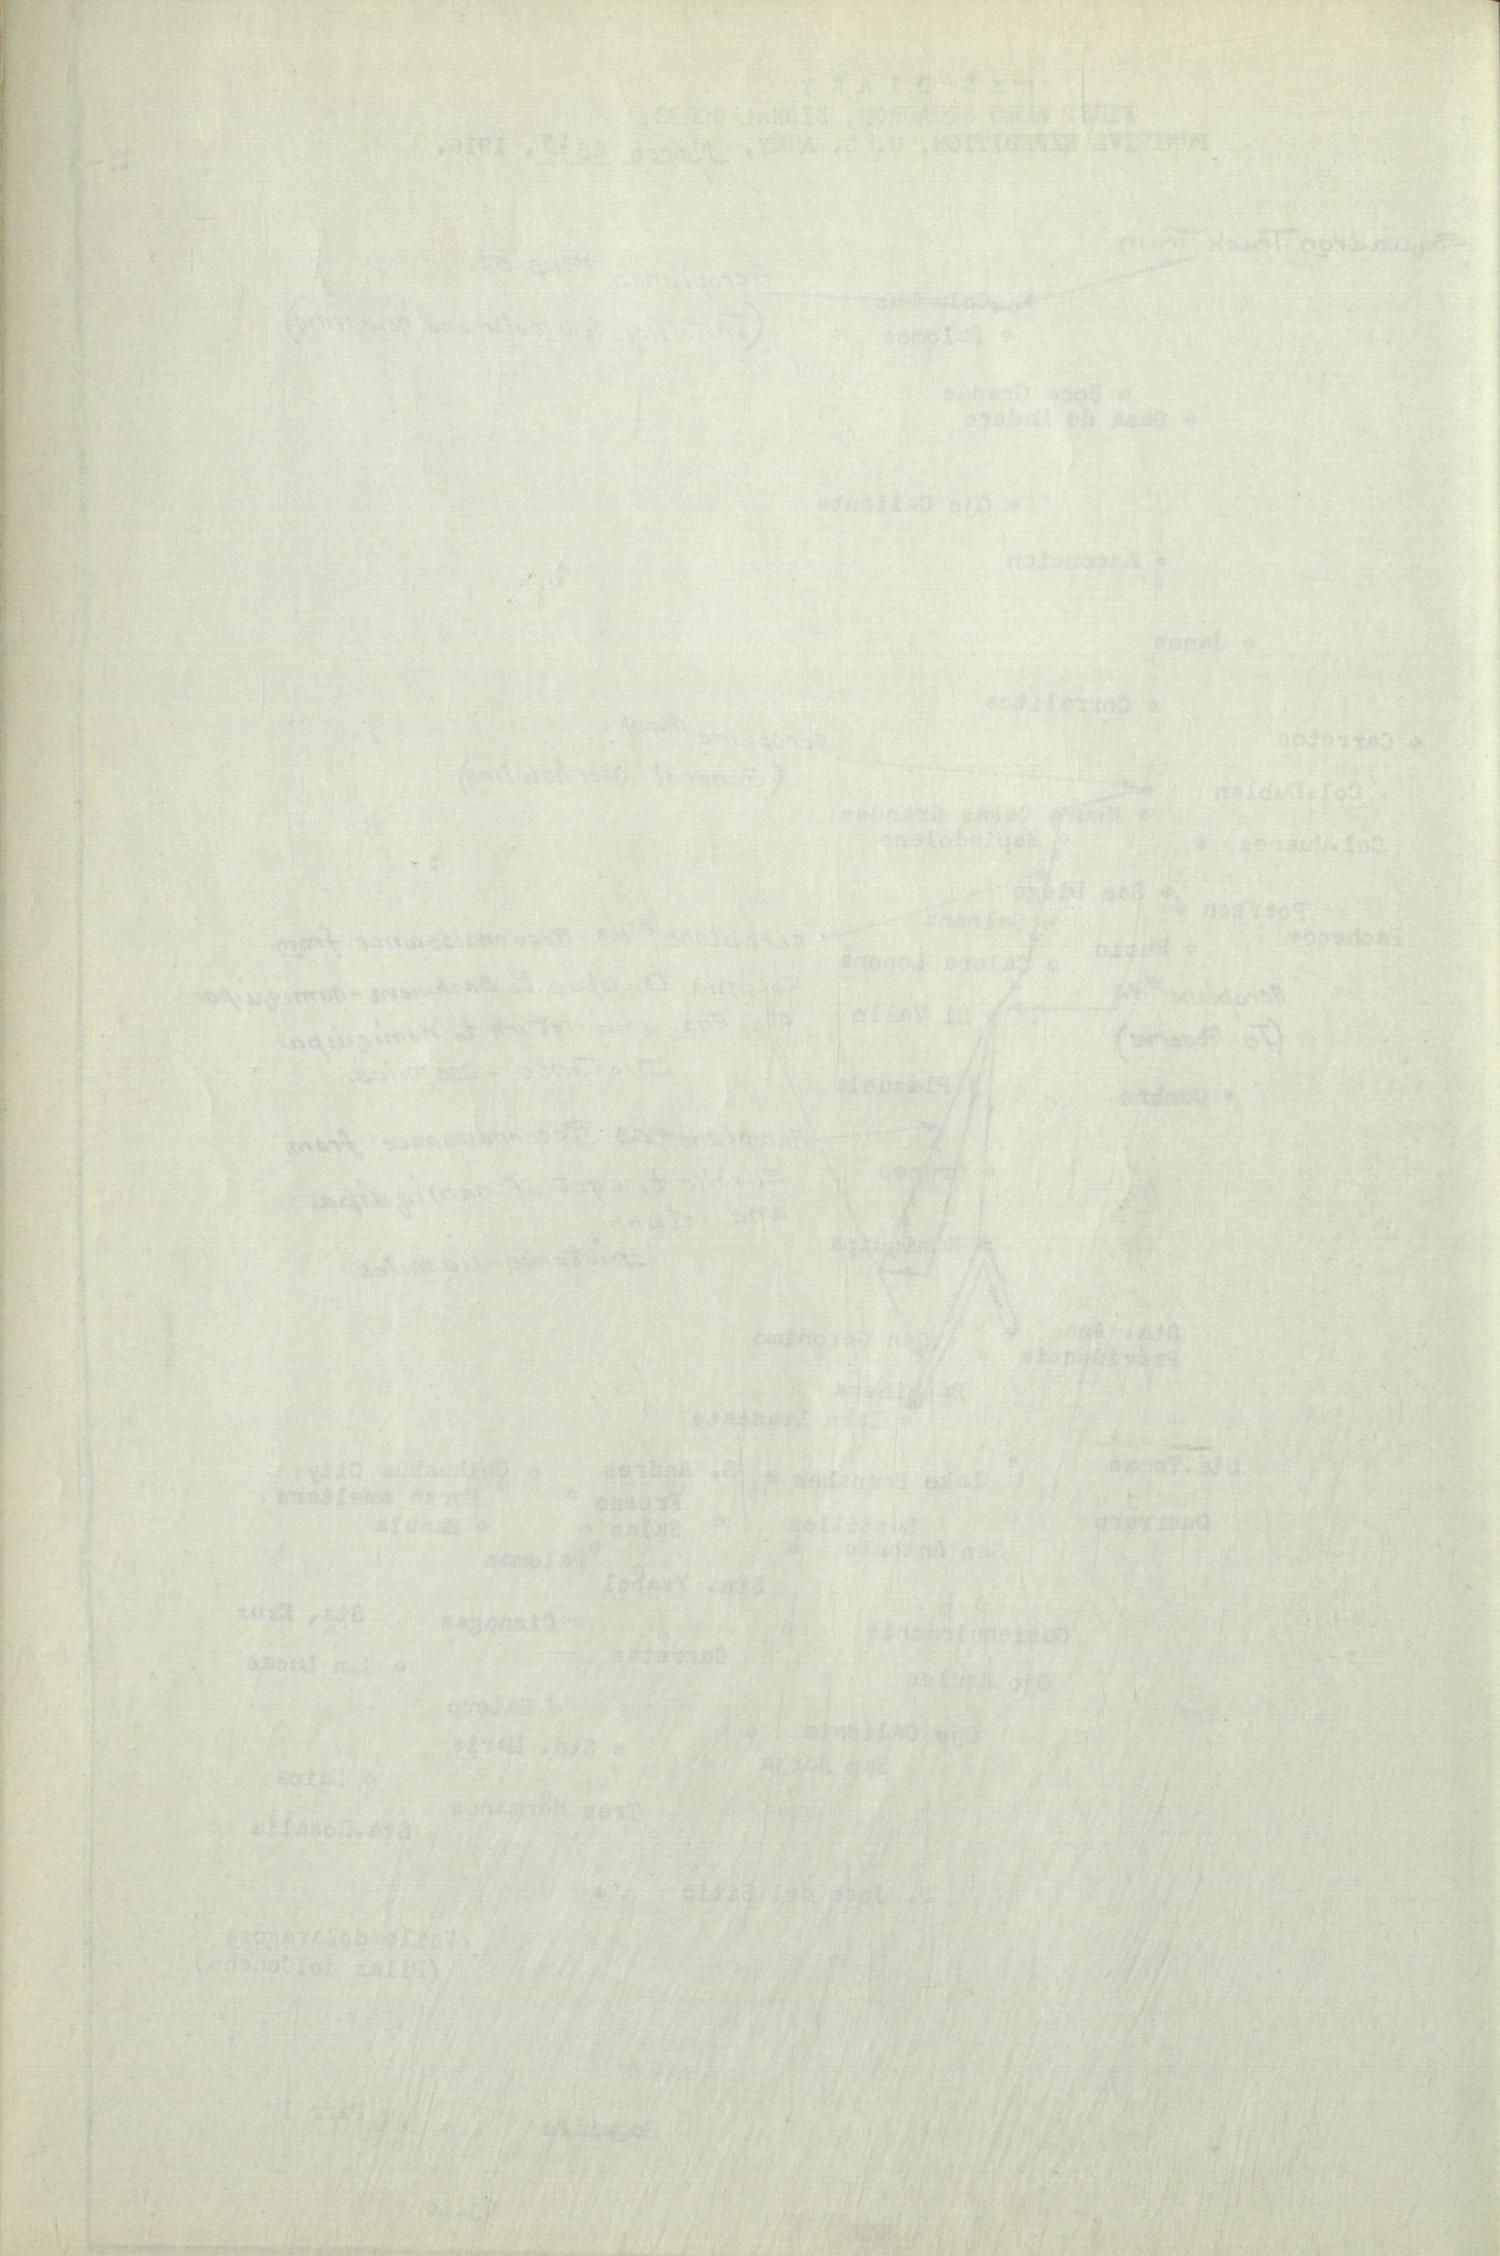 First Aereo Squadron, Signal Corps, war diary : period from March 12 to April 23, 1916.
                                                
                                                    42
                                                